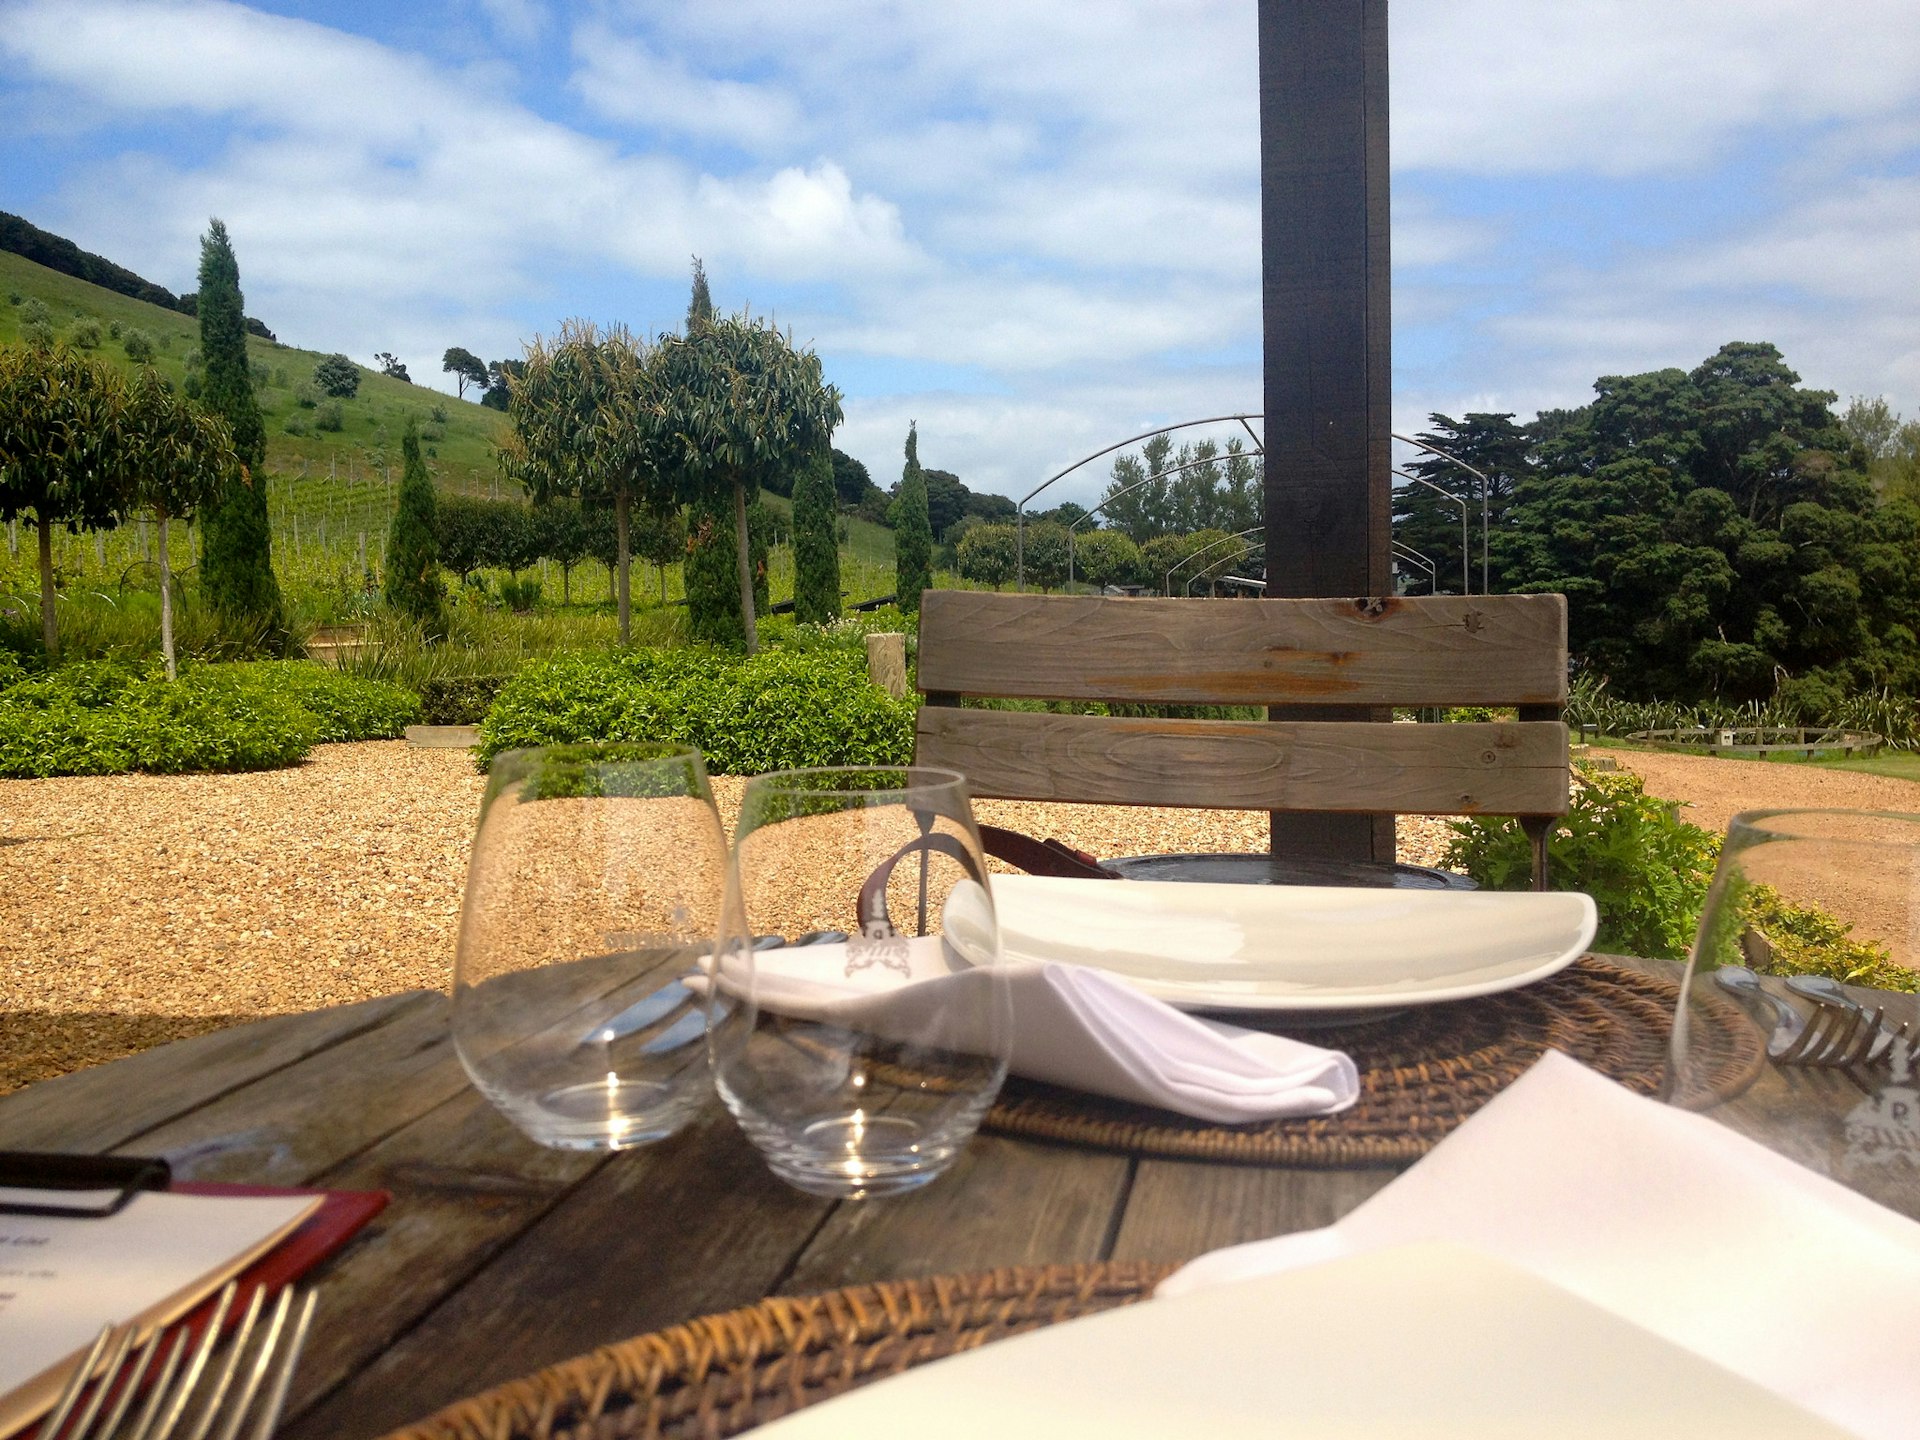 Lunching in the sunshine at Poderi Crisci. Image by Brian Lamb / CC BY 2.0